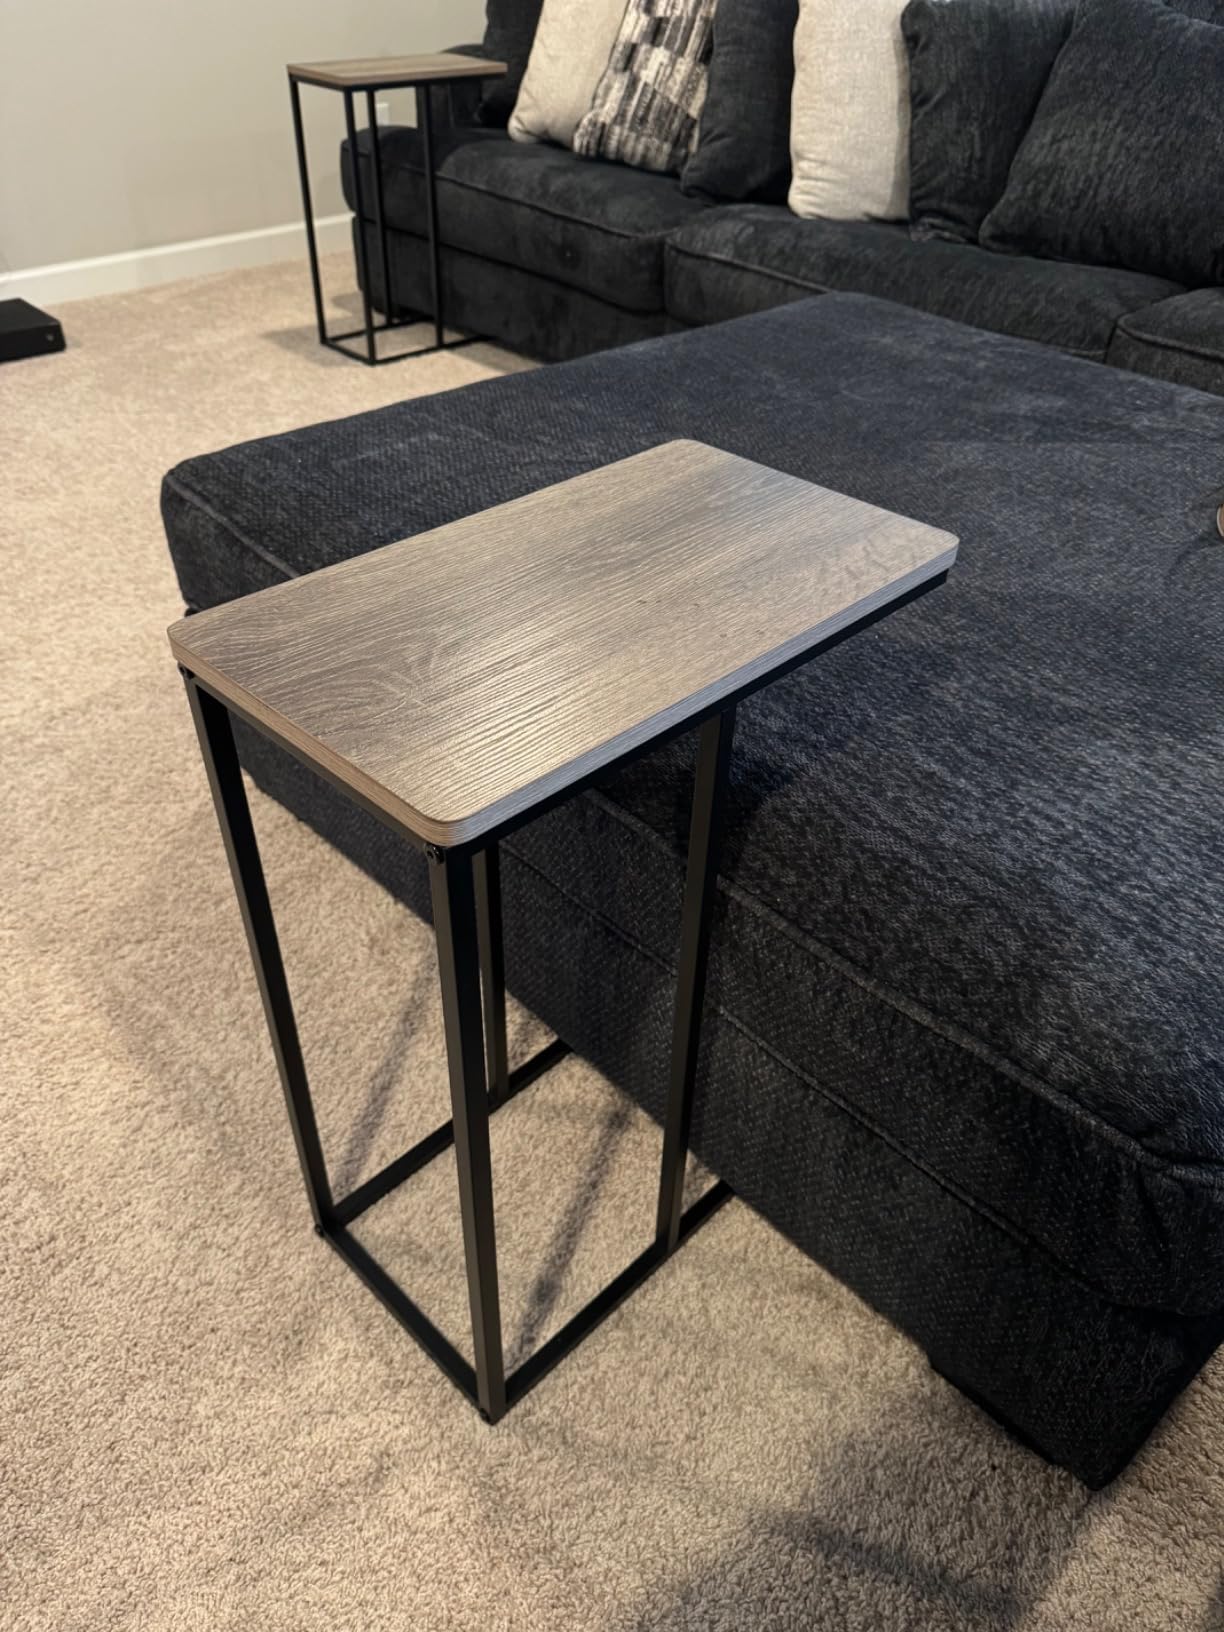 Versatile end tables and love the look, but not super sturdy